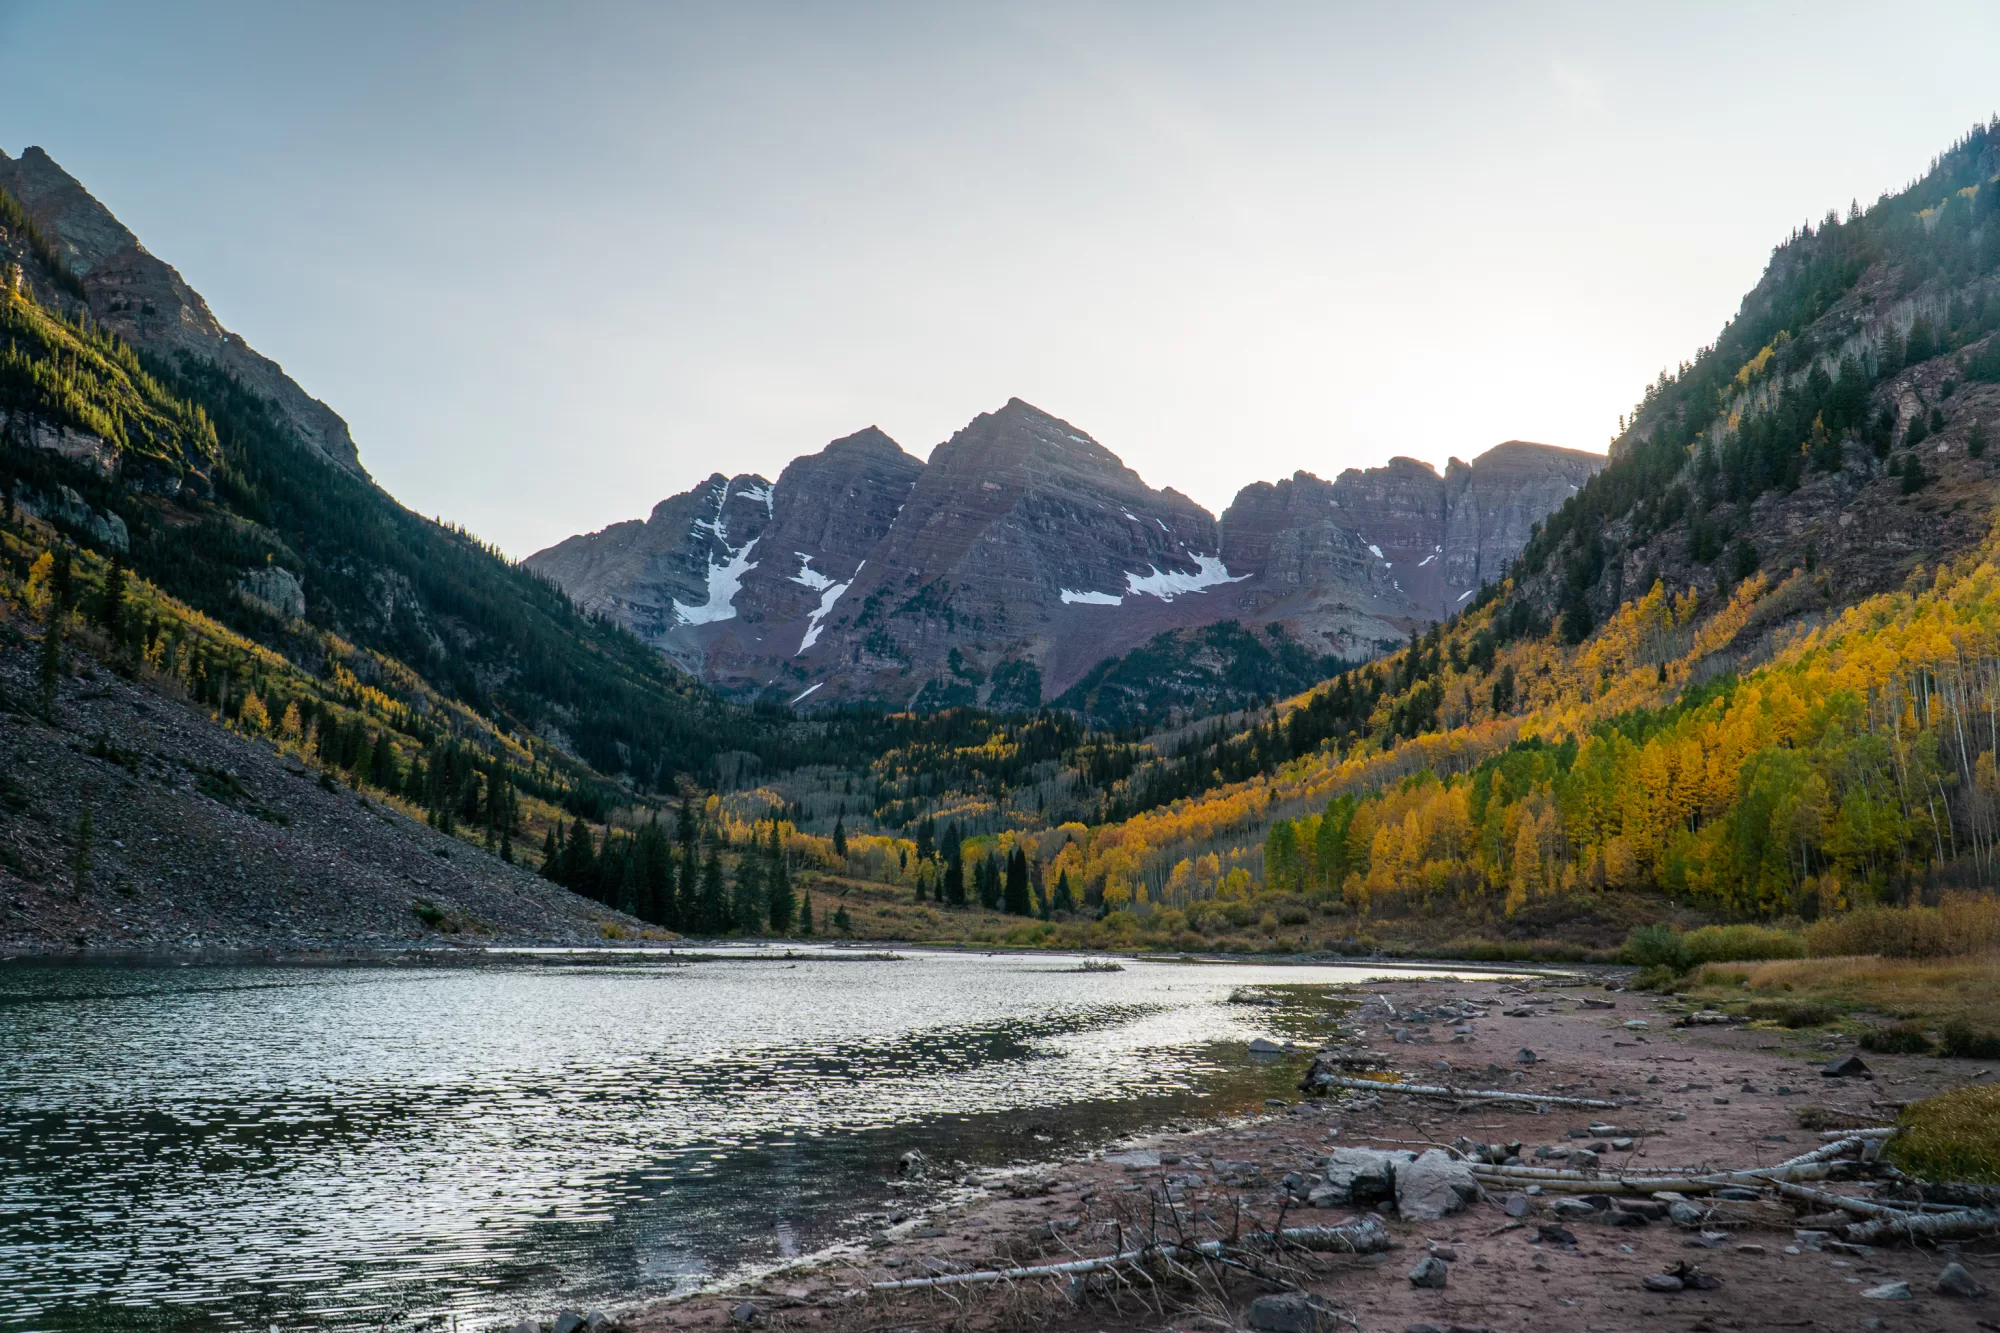 The Maroon Bells, Snowmass, Colorado, with fall foliage.